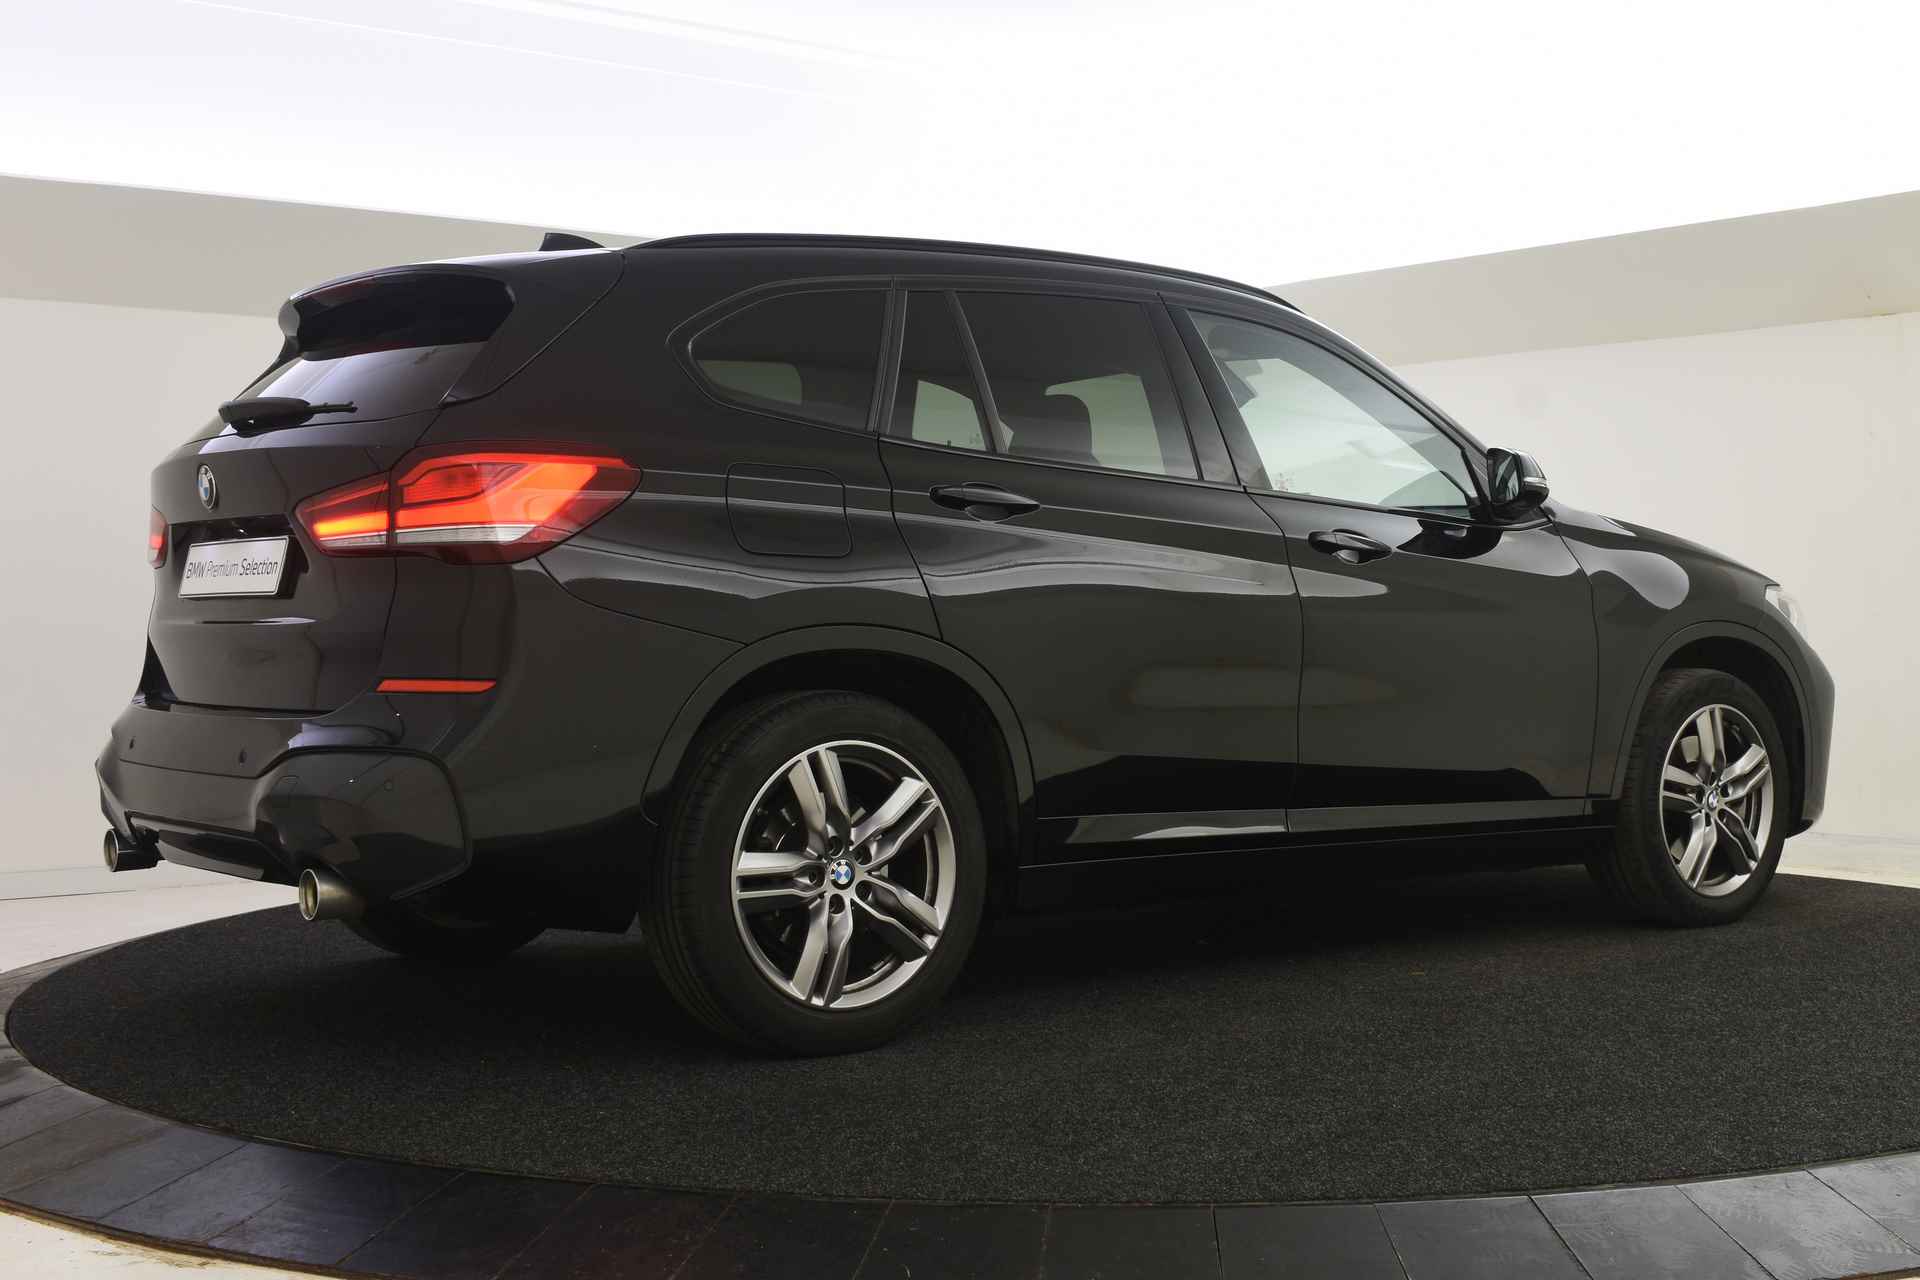 BMW X1 sDrive20i Executive M Sport Automaat / Sportstoelen / Adaptieve LED / Active Cruise Control / Achteruitrijcamera / Head-Up / Park Assistant / Driving Assistant Plus - 7/47